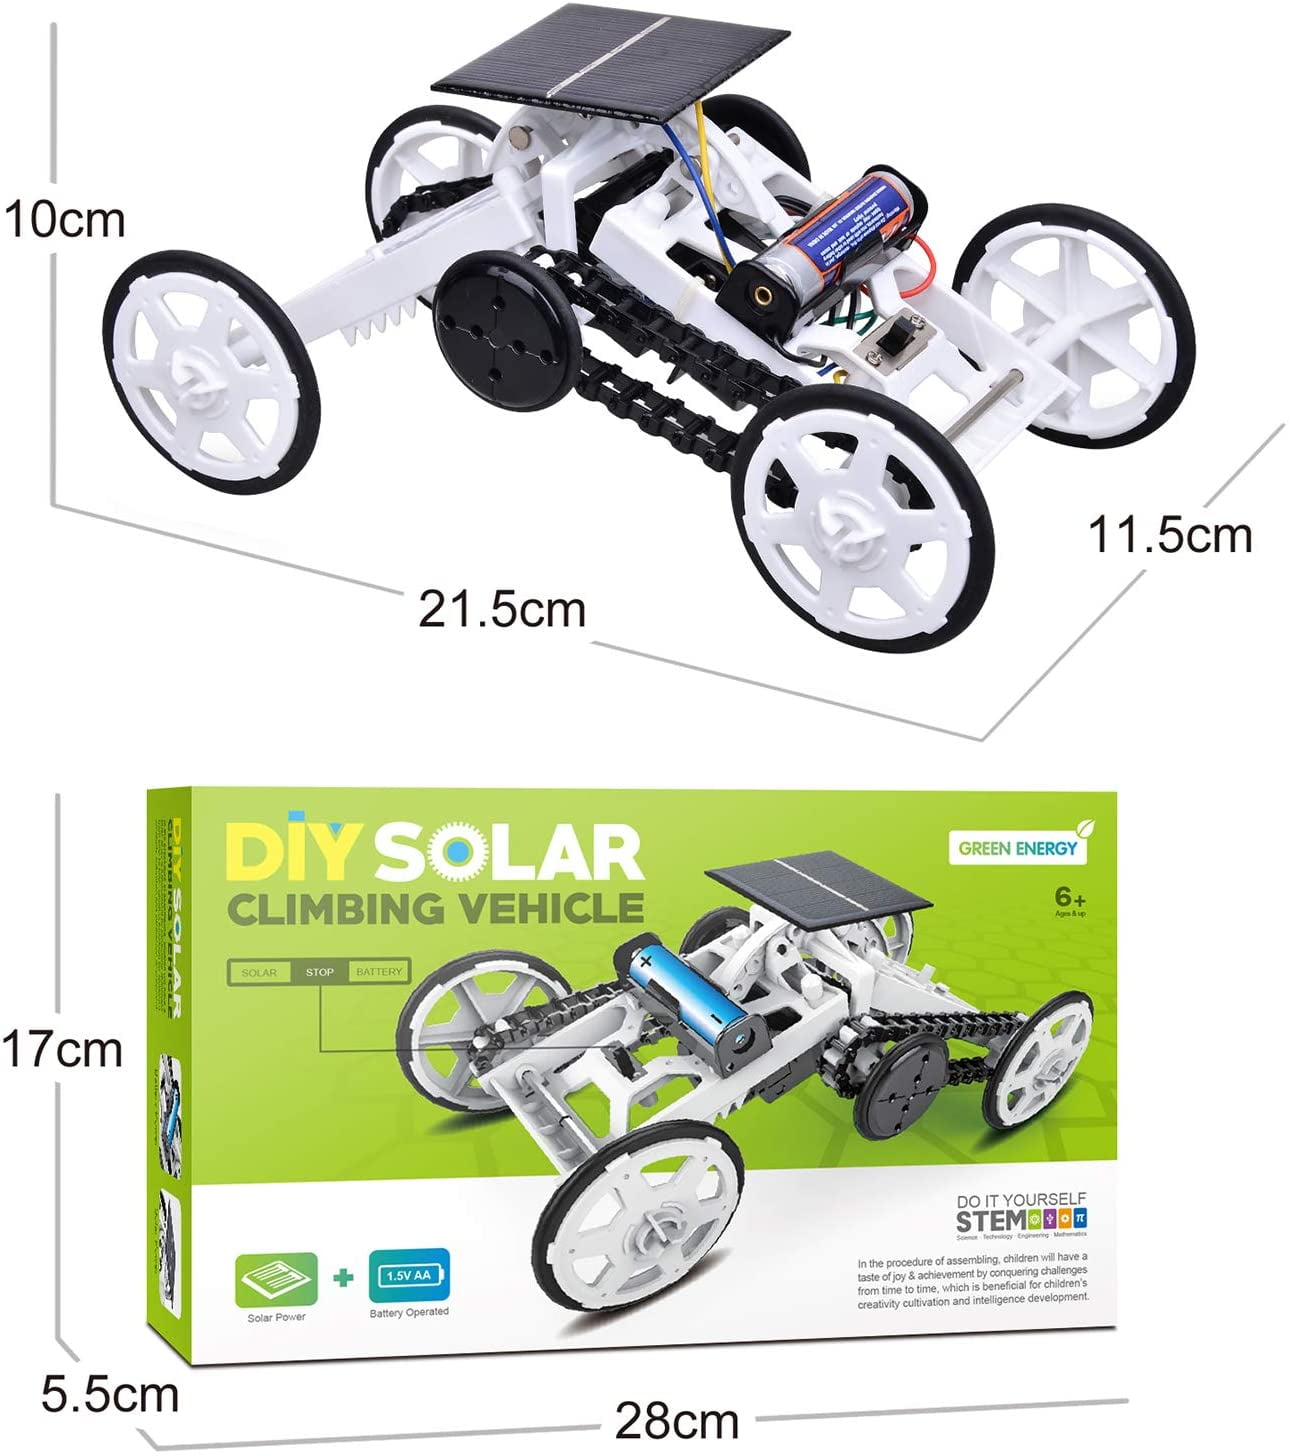 Engineering Stem DIY Car Assembly Gift Toy for Boys Kids & Adults 4WD Electric 